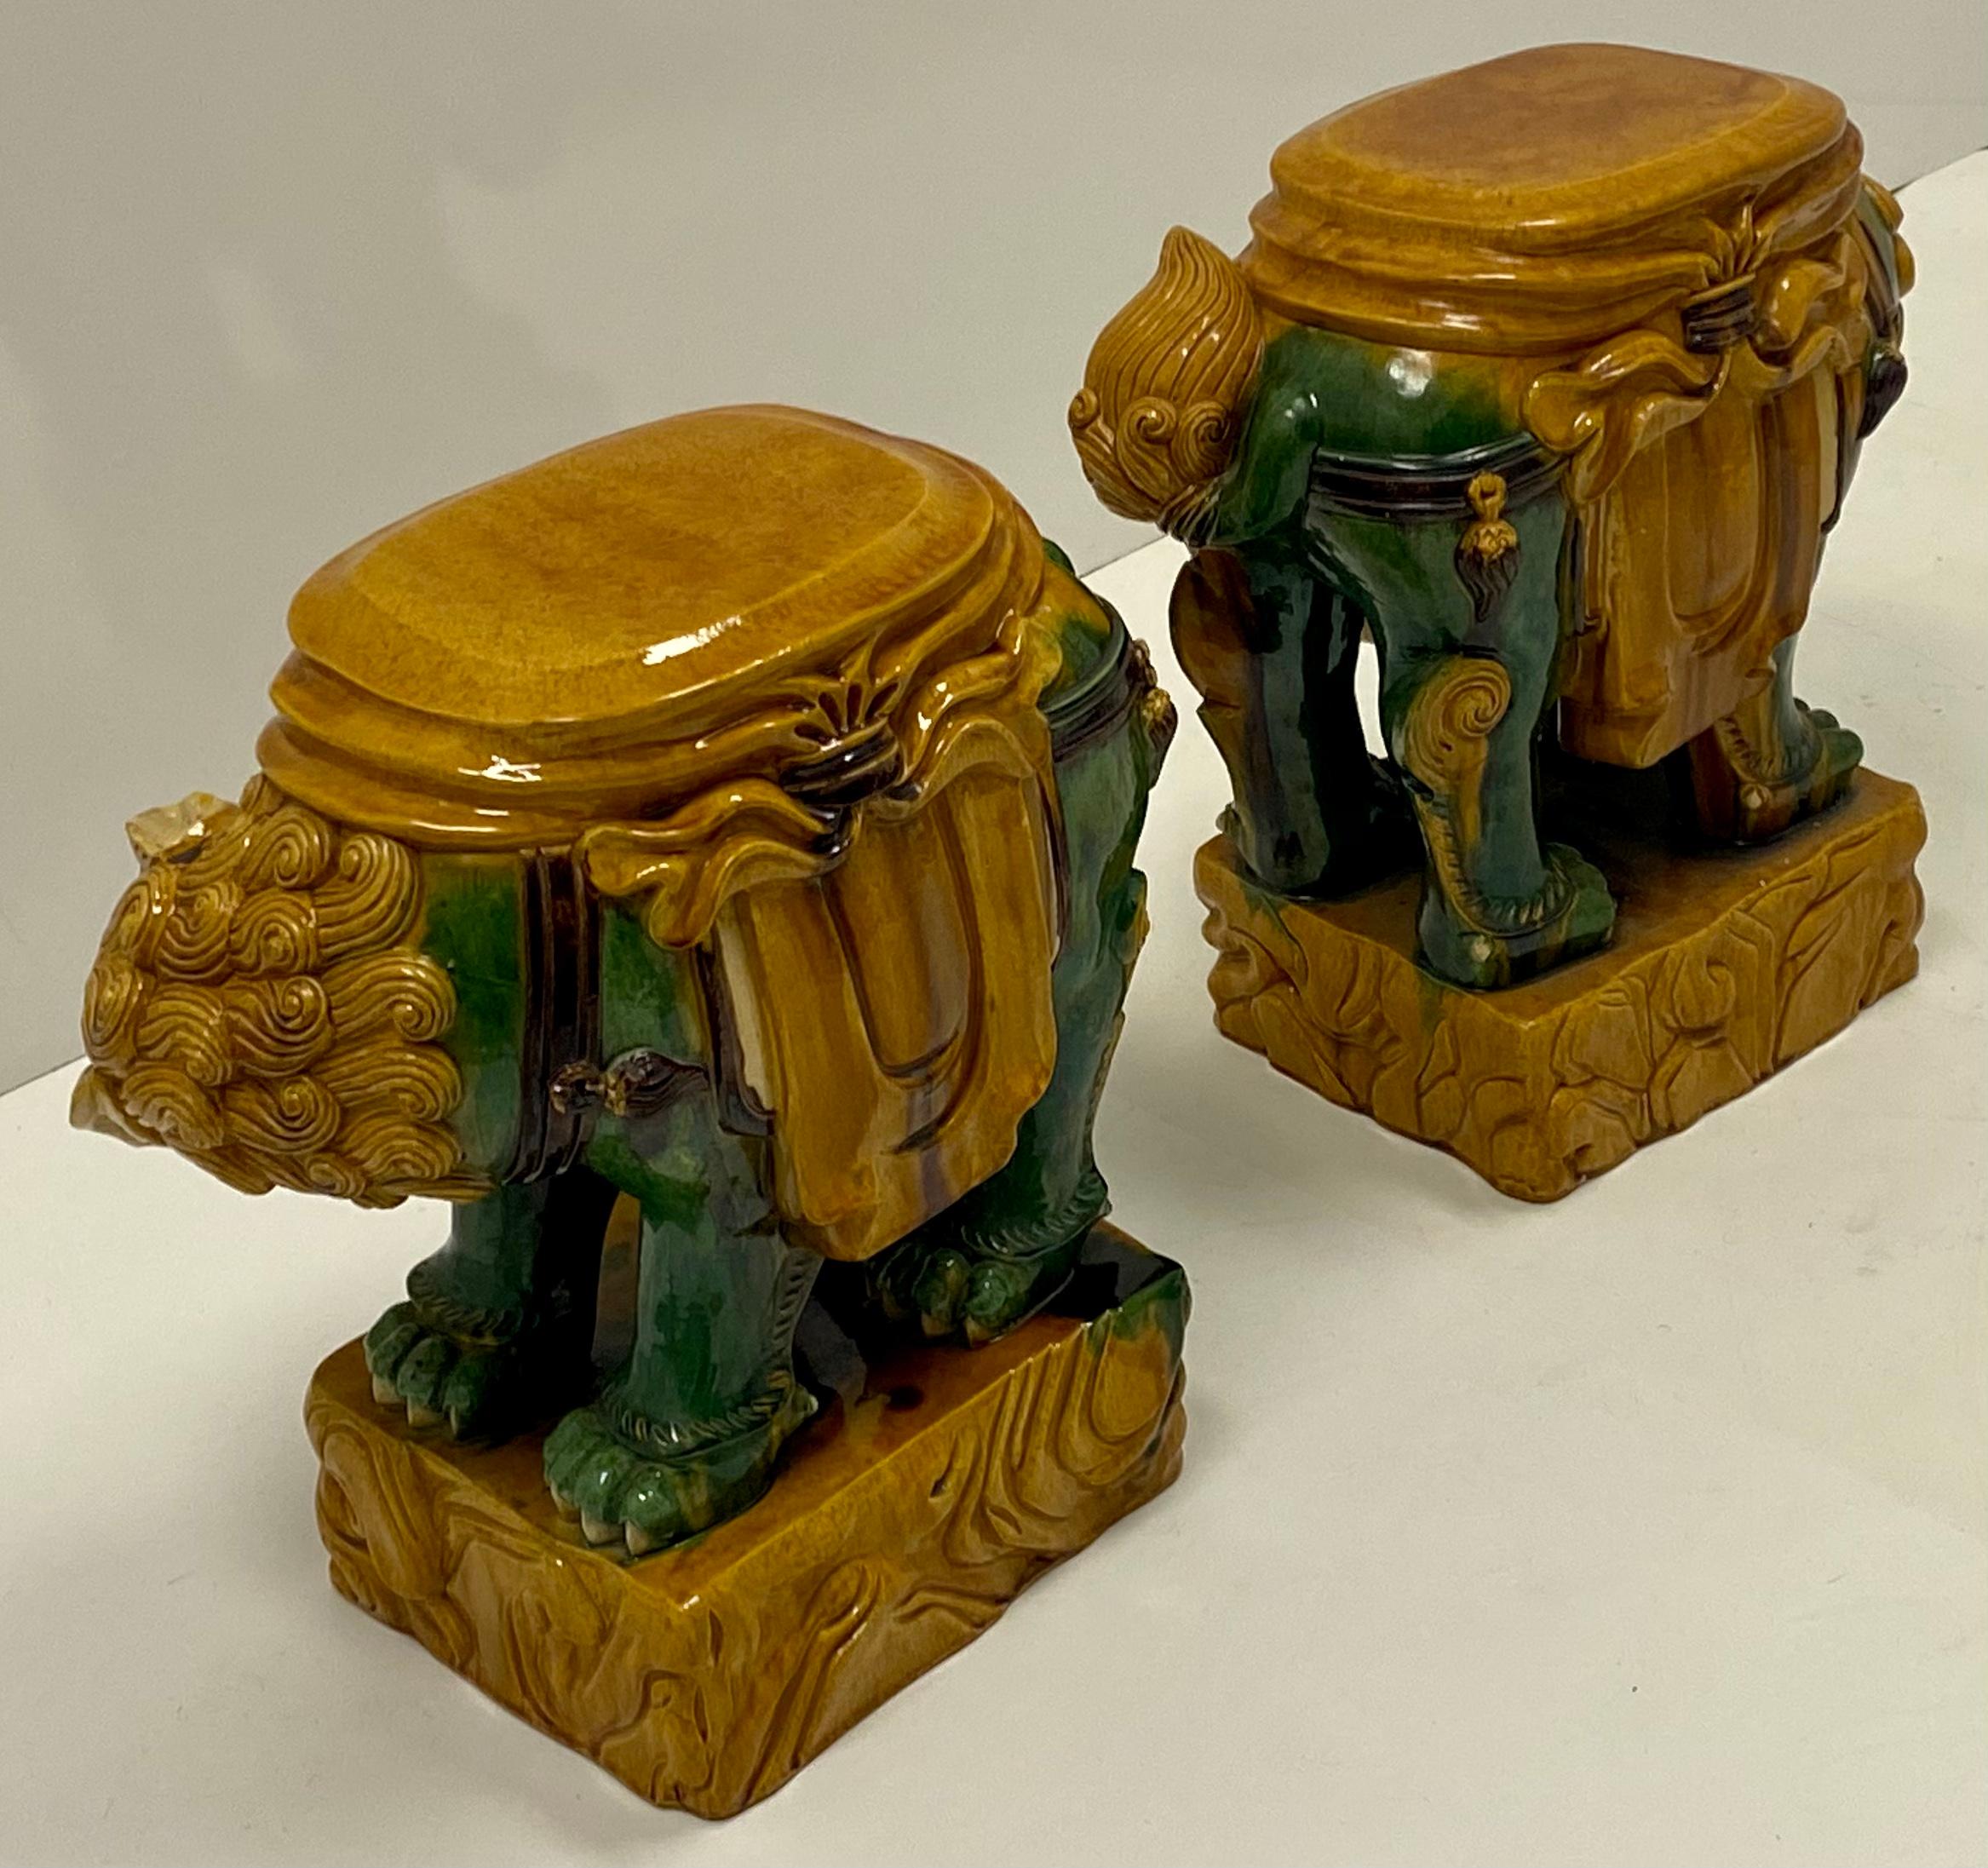 This is a facing pair of midcentury Italian glazed terracotta foo dog garden seats in very good condition. They are a rare find! They are unmarked and in very good condition.